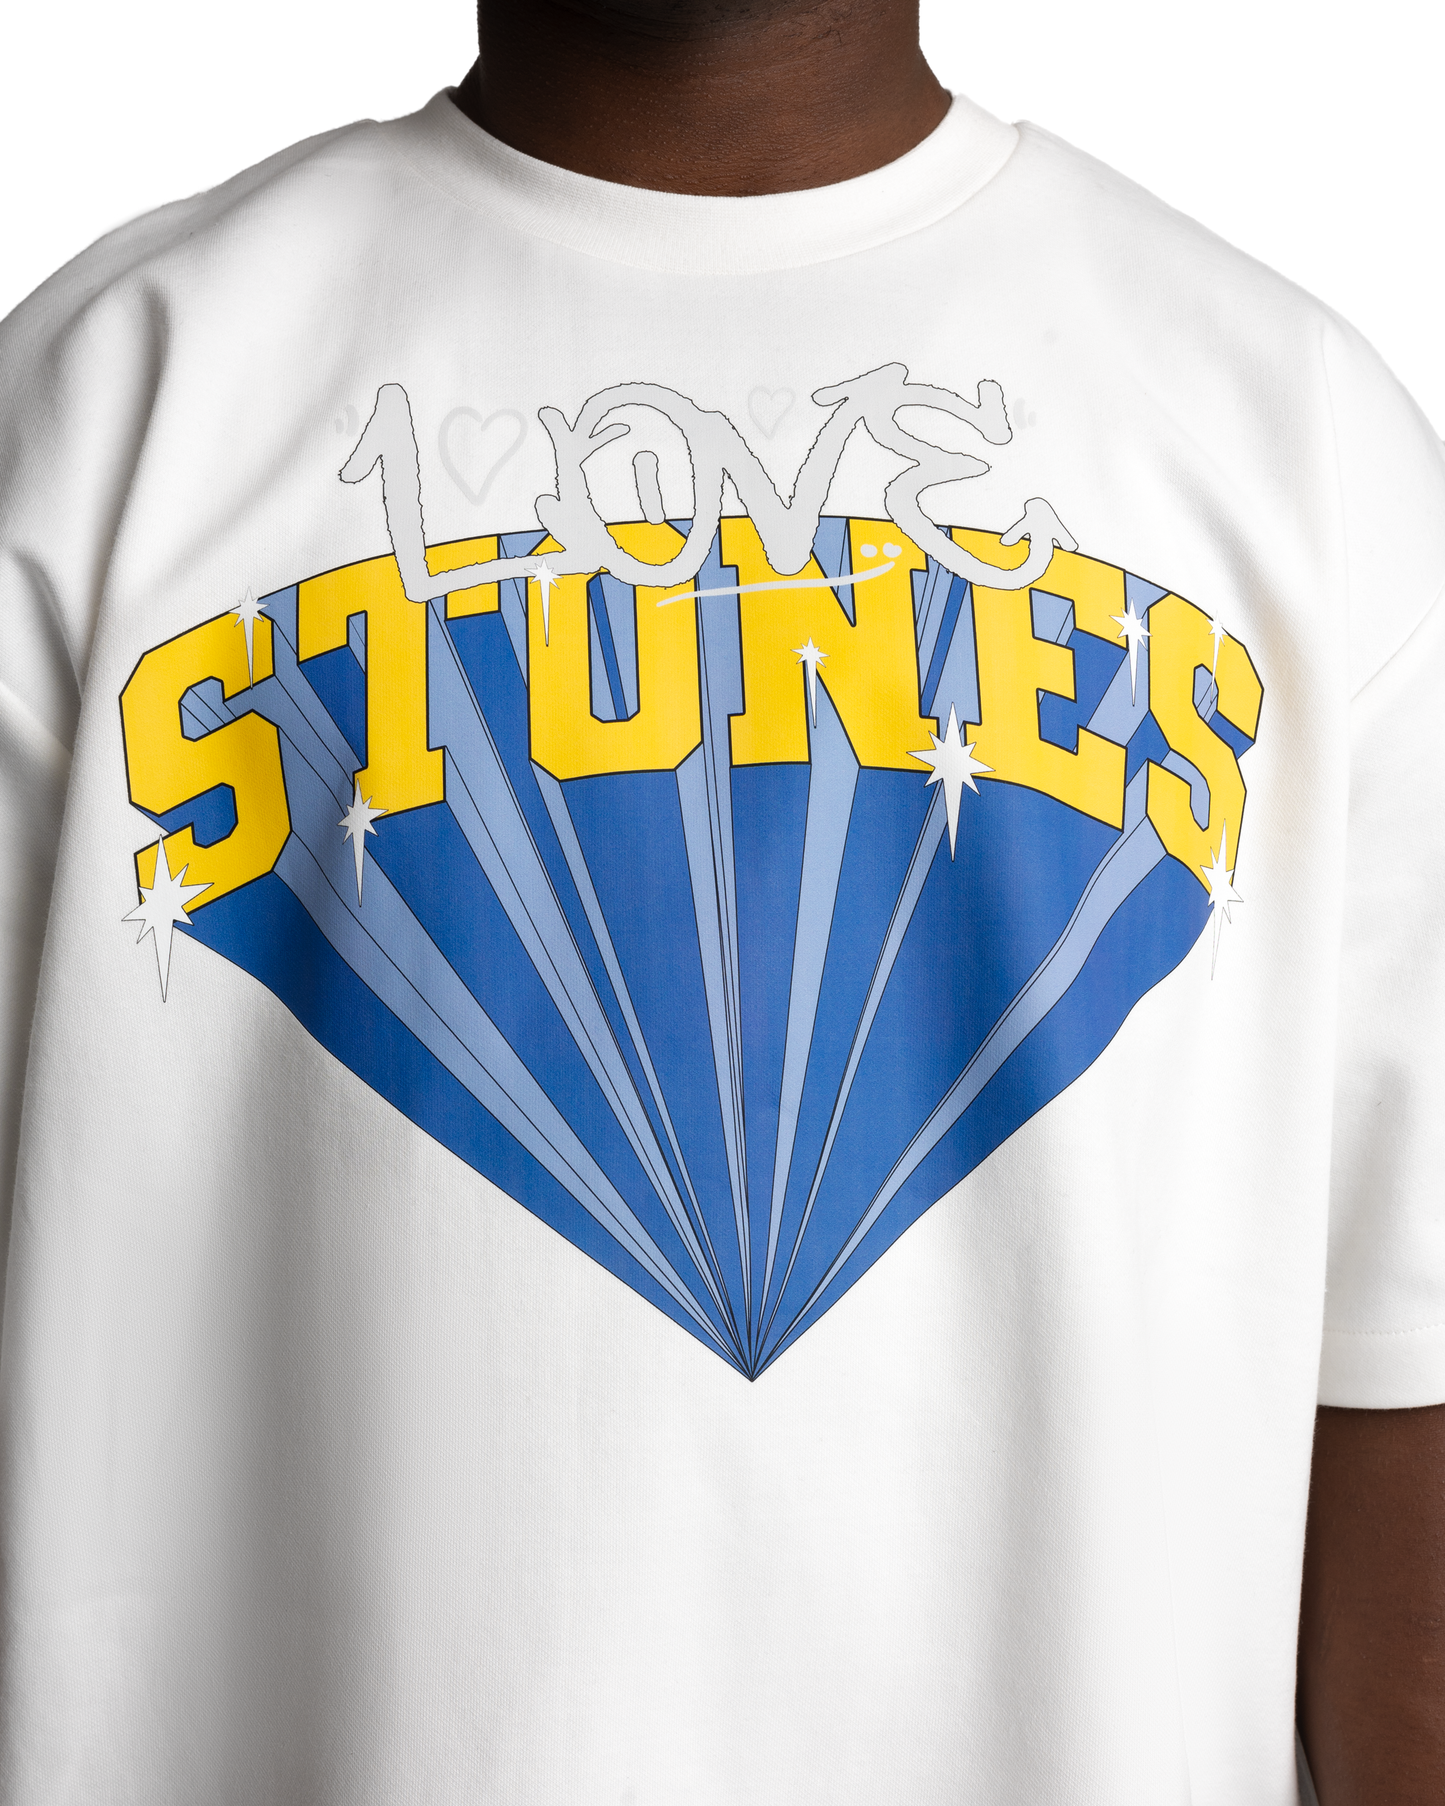 "Limited" Stones Island Search Logo T-Shirt - Blue & Yellow